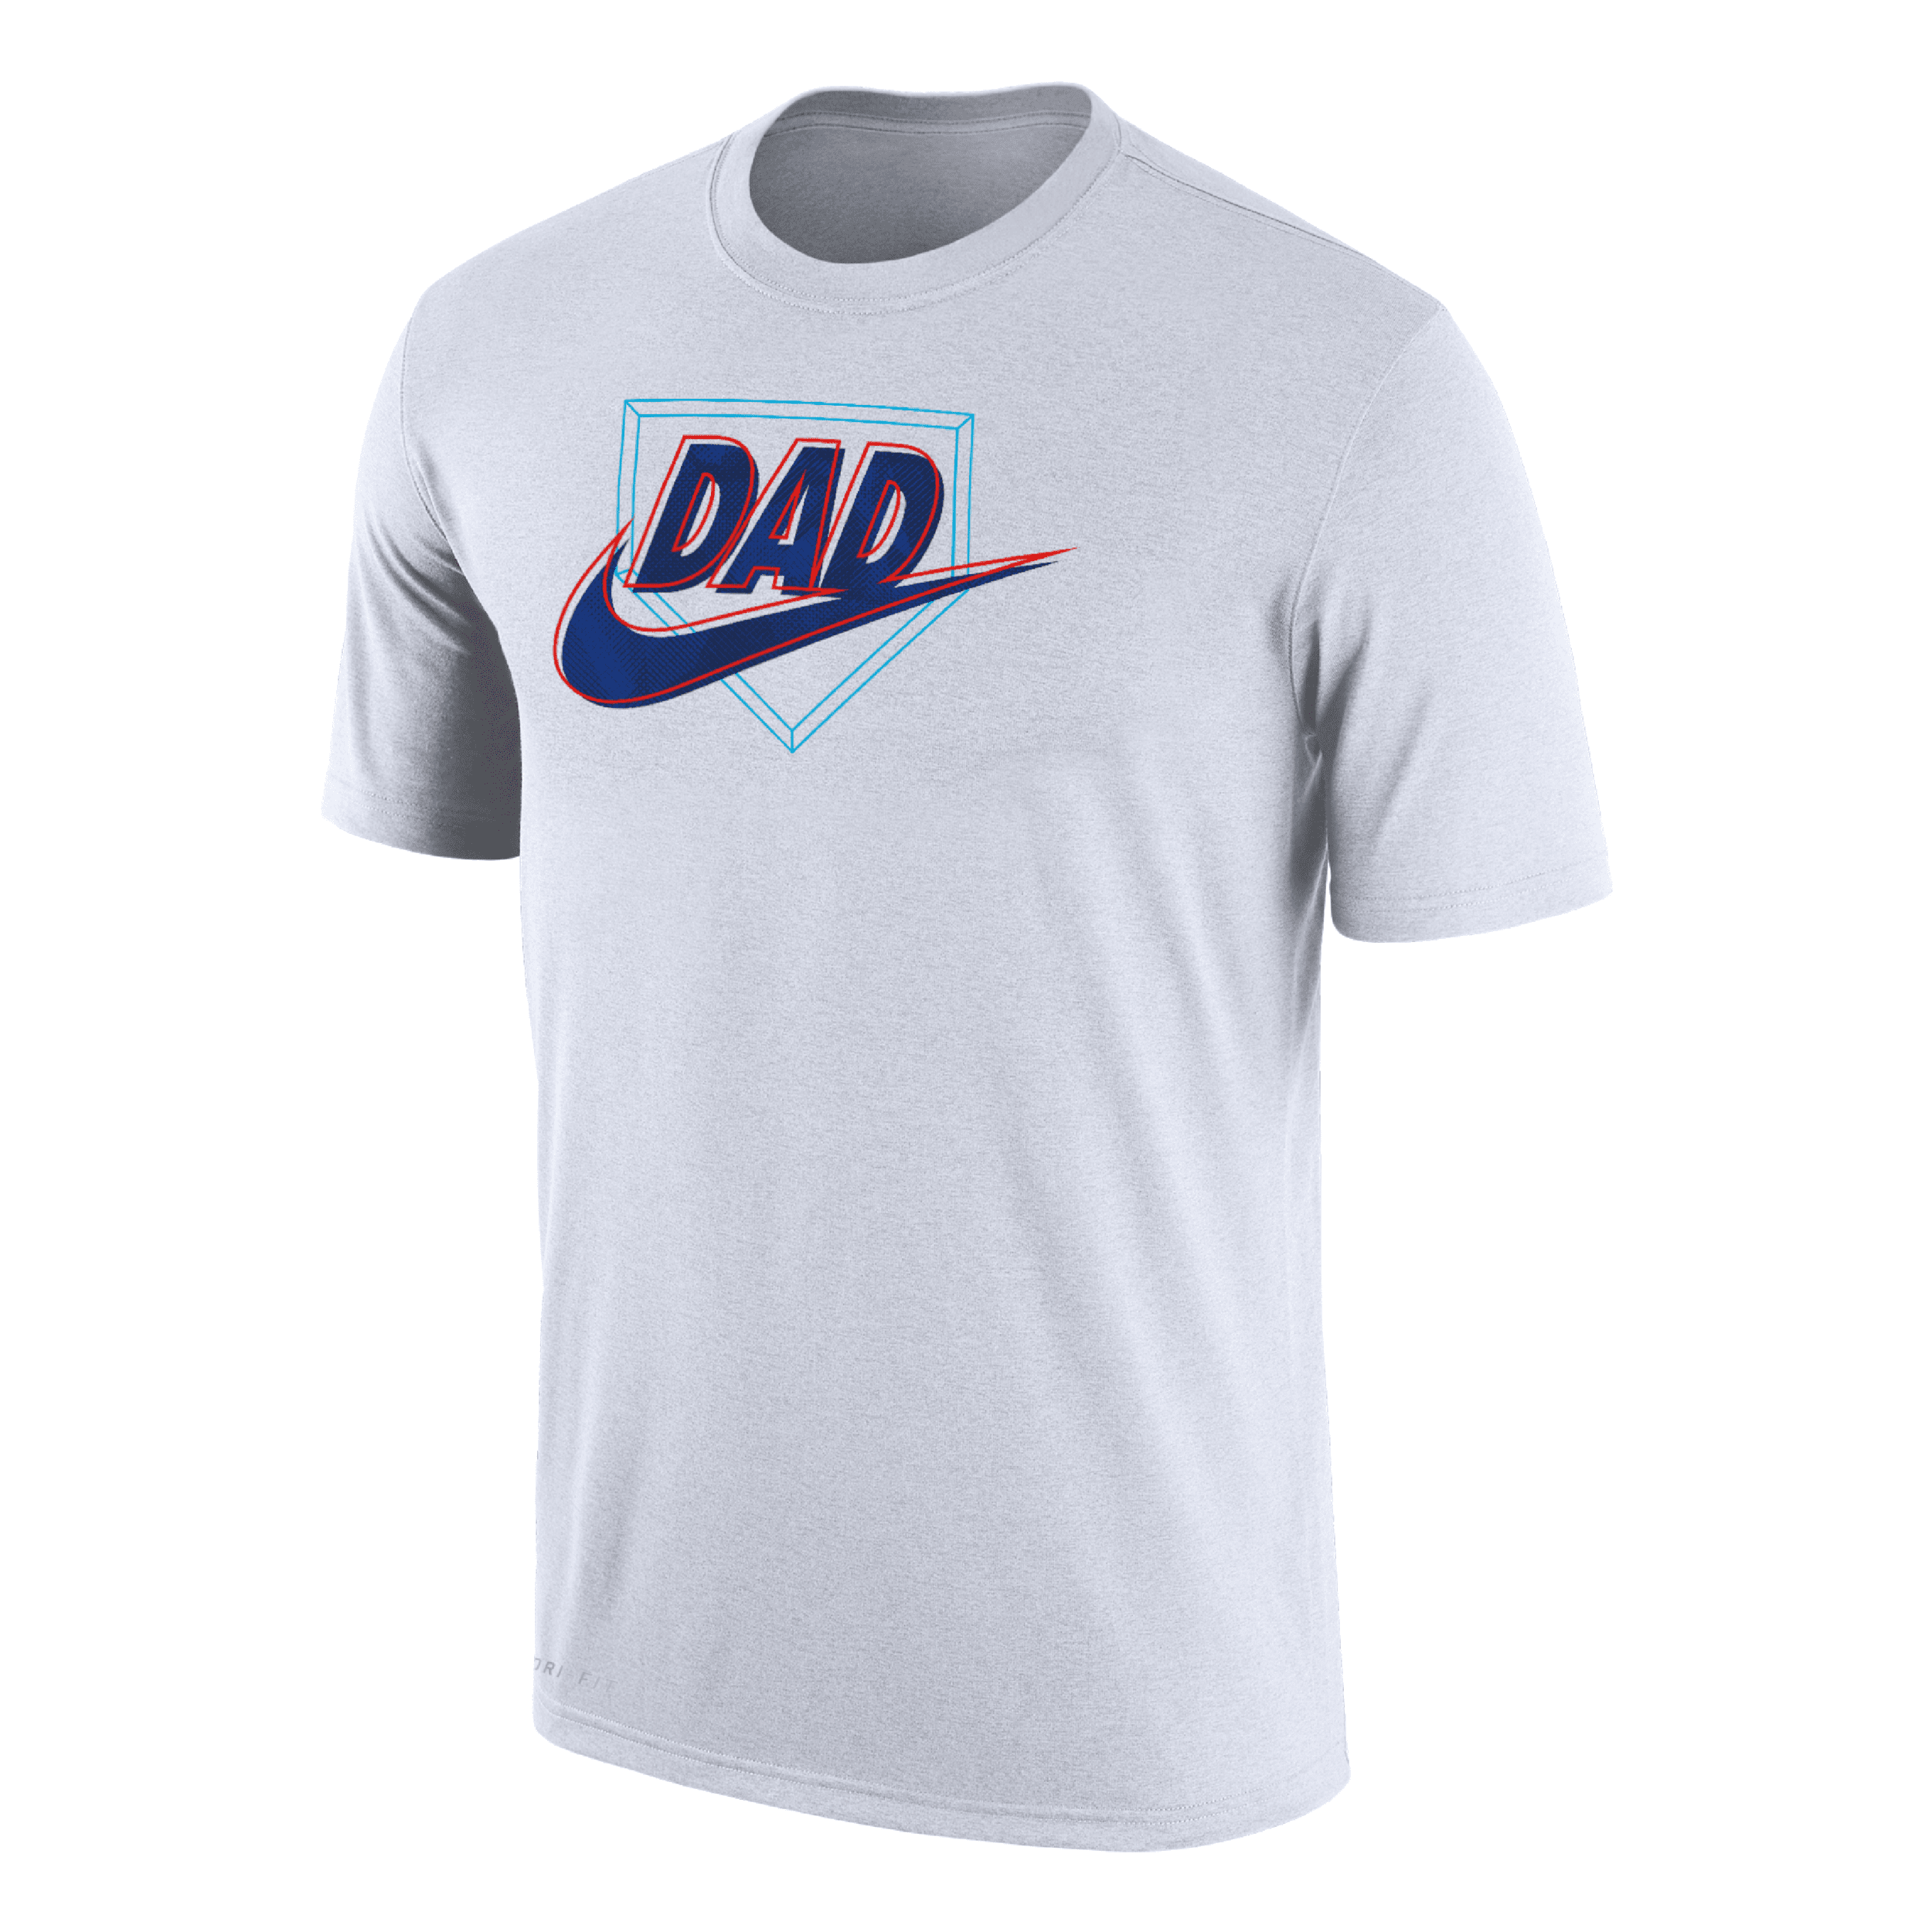 Nike Men's "father's Day" Baseball T-shirt In White